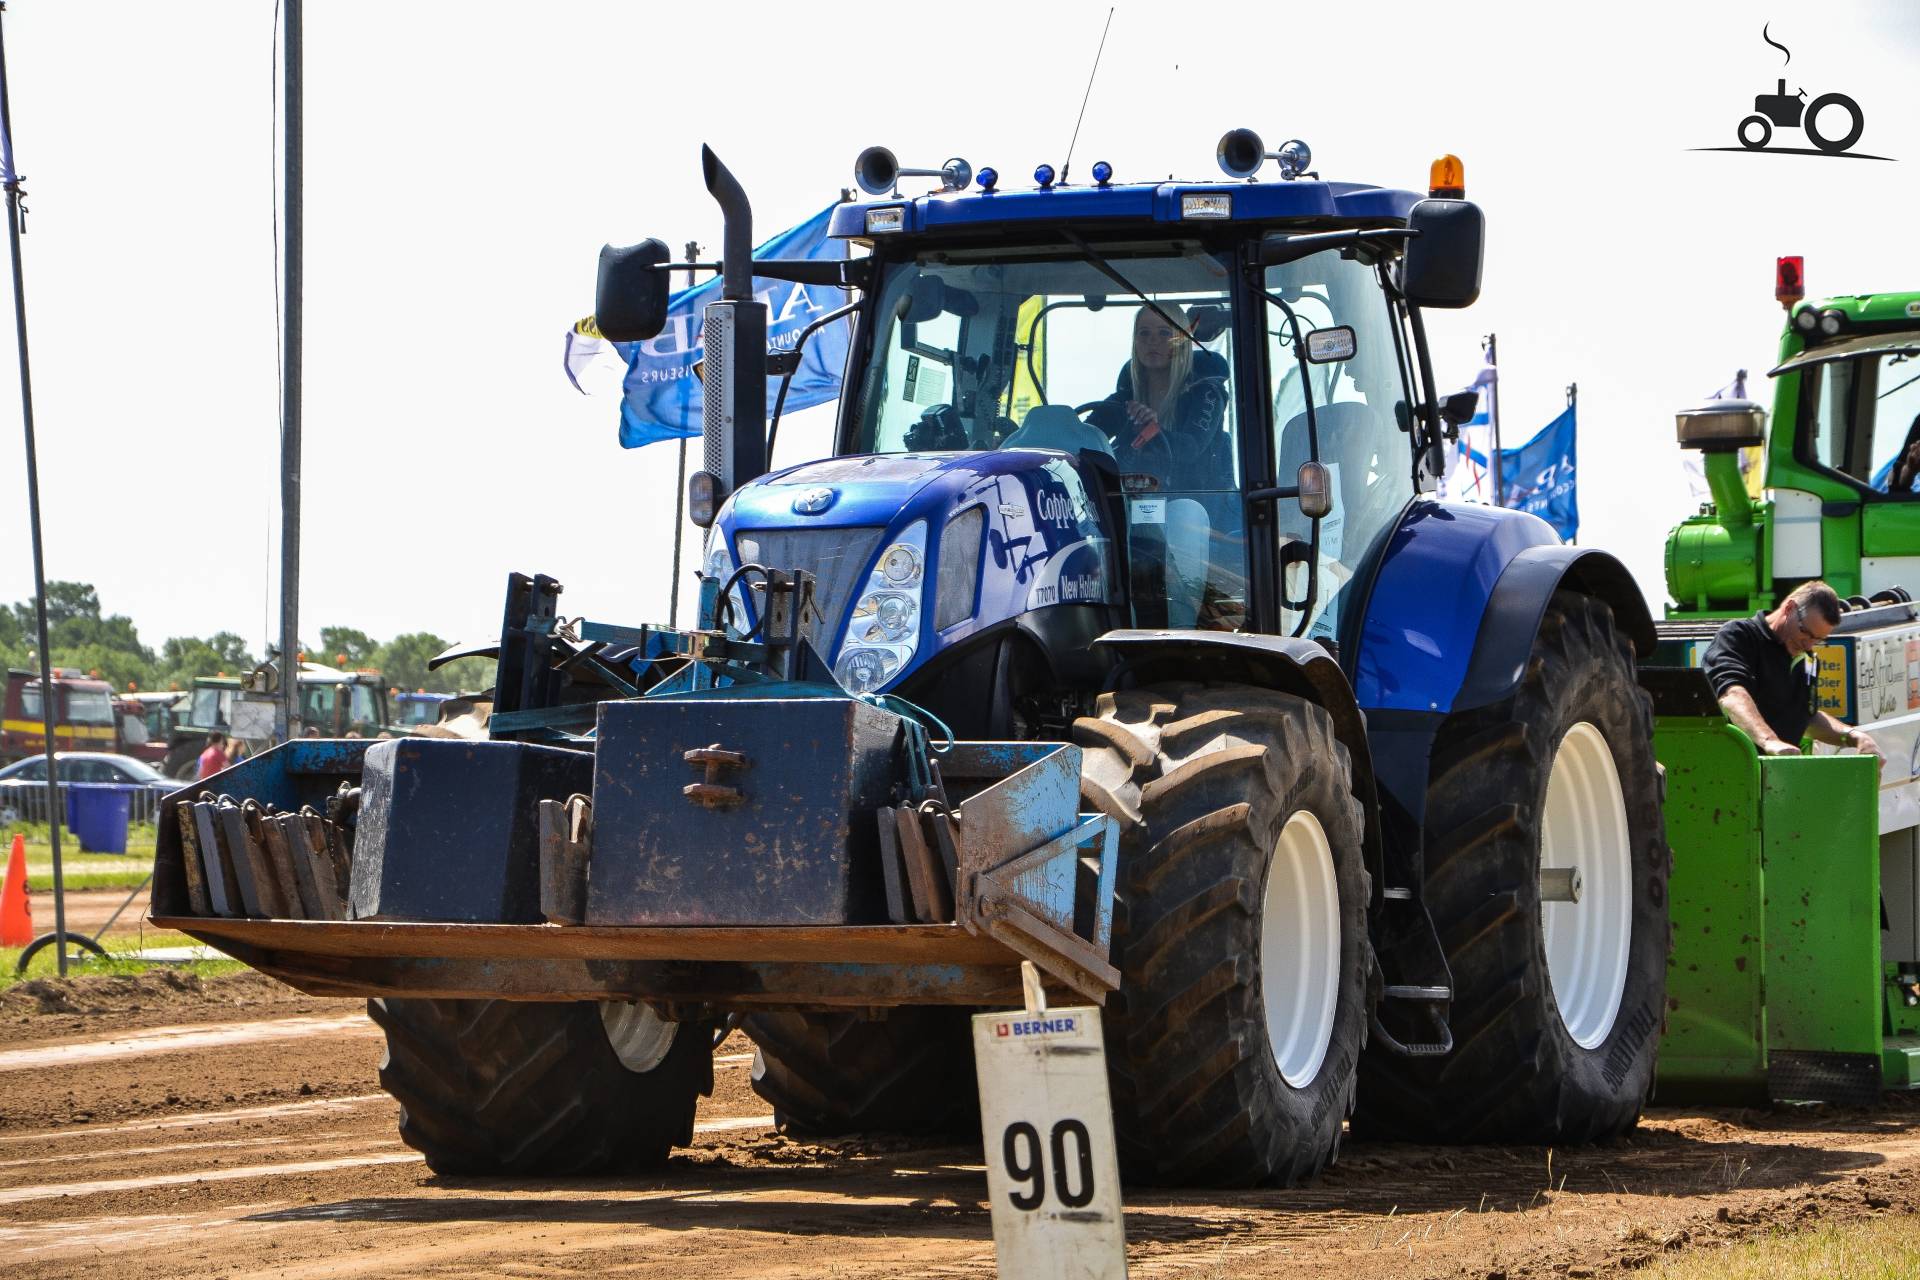 New Holland T 7070